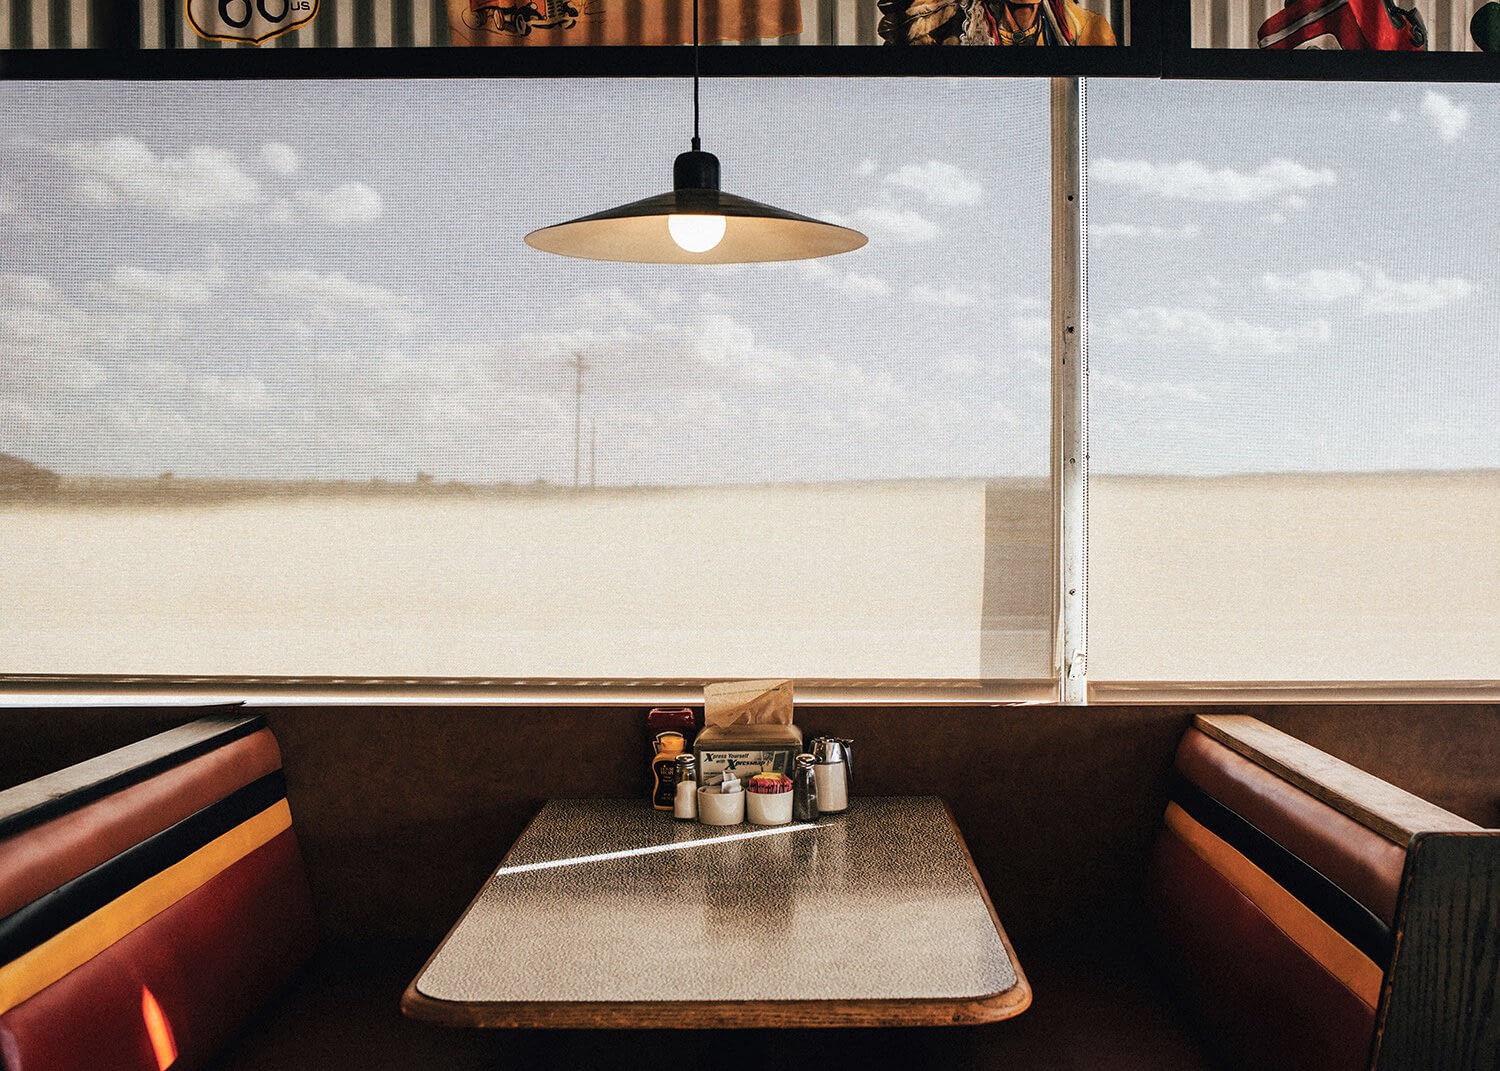 American Diners, captured by Arnaud Montagard - EverythingWithATwist